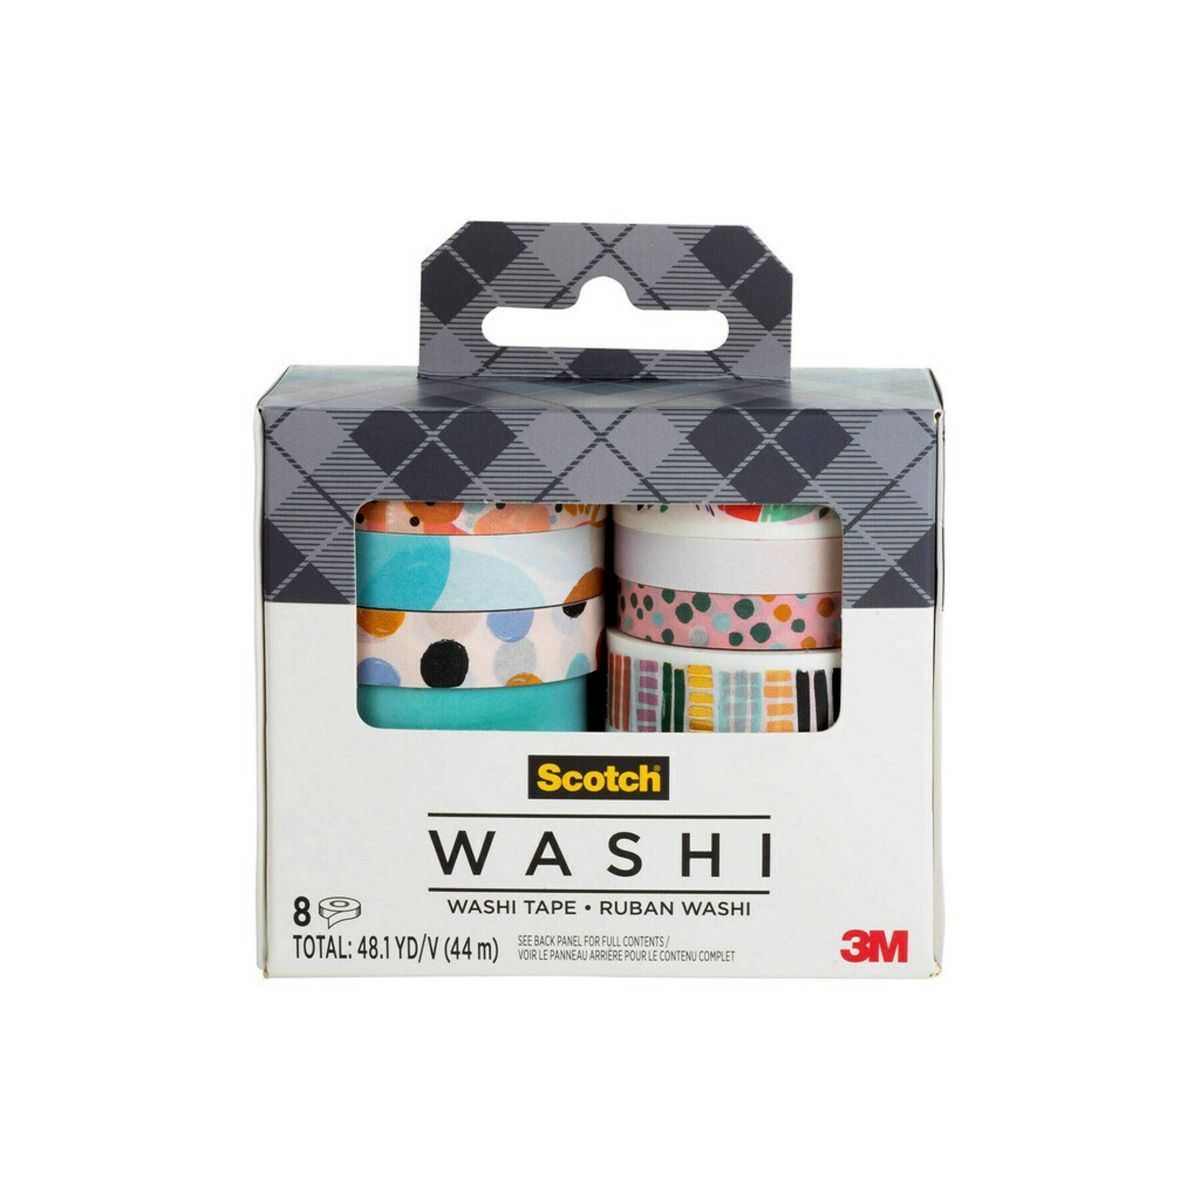 Scotch 8pk Expressions Washi Tape Abstract Modern | Target